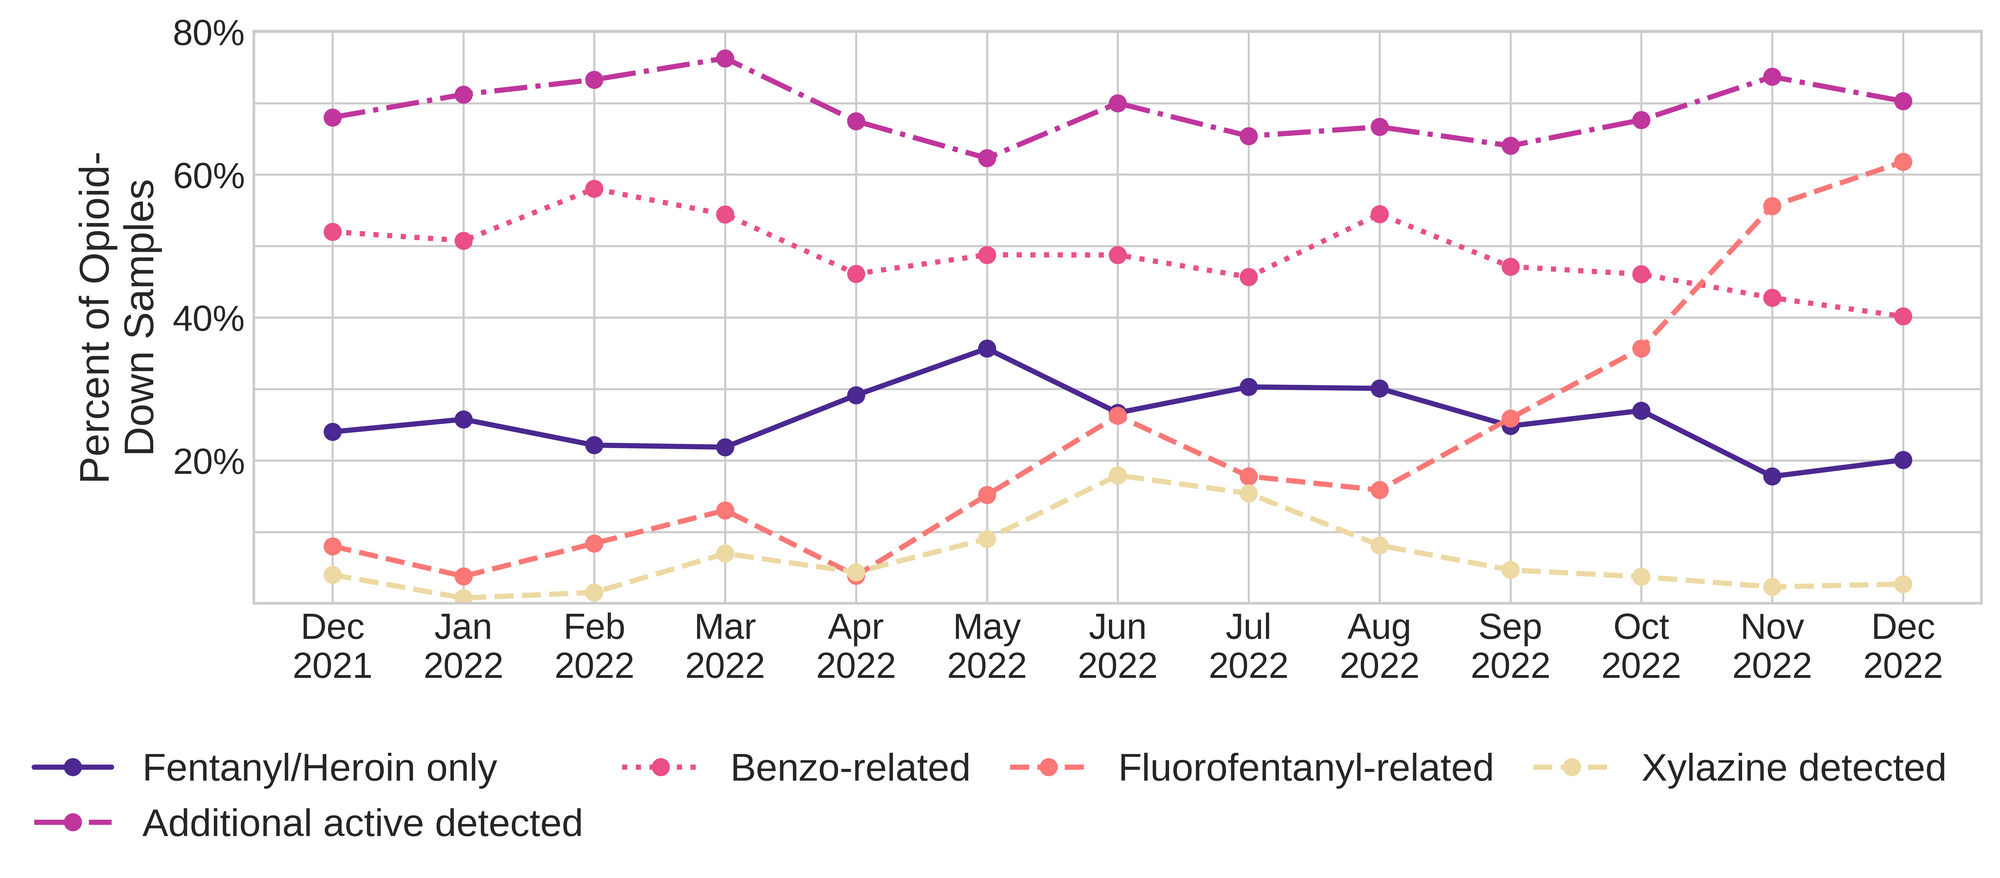 Figure 3. The percentage of expected opioid-down samples checked between December 2021 and December 2022 that only contained fentanyl/heroin actives (solid dark purple), opioid-down samples with an additional active detected (dot-dashed magenta), opioid-down samples that contained a benzodiazepine-related drug (dotted pink), opioid-down samples that contained fluorofentanyl (dashed salmon), and opioid-down samples that contained xylazine (dashed yellow).